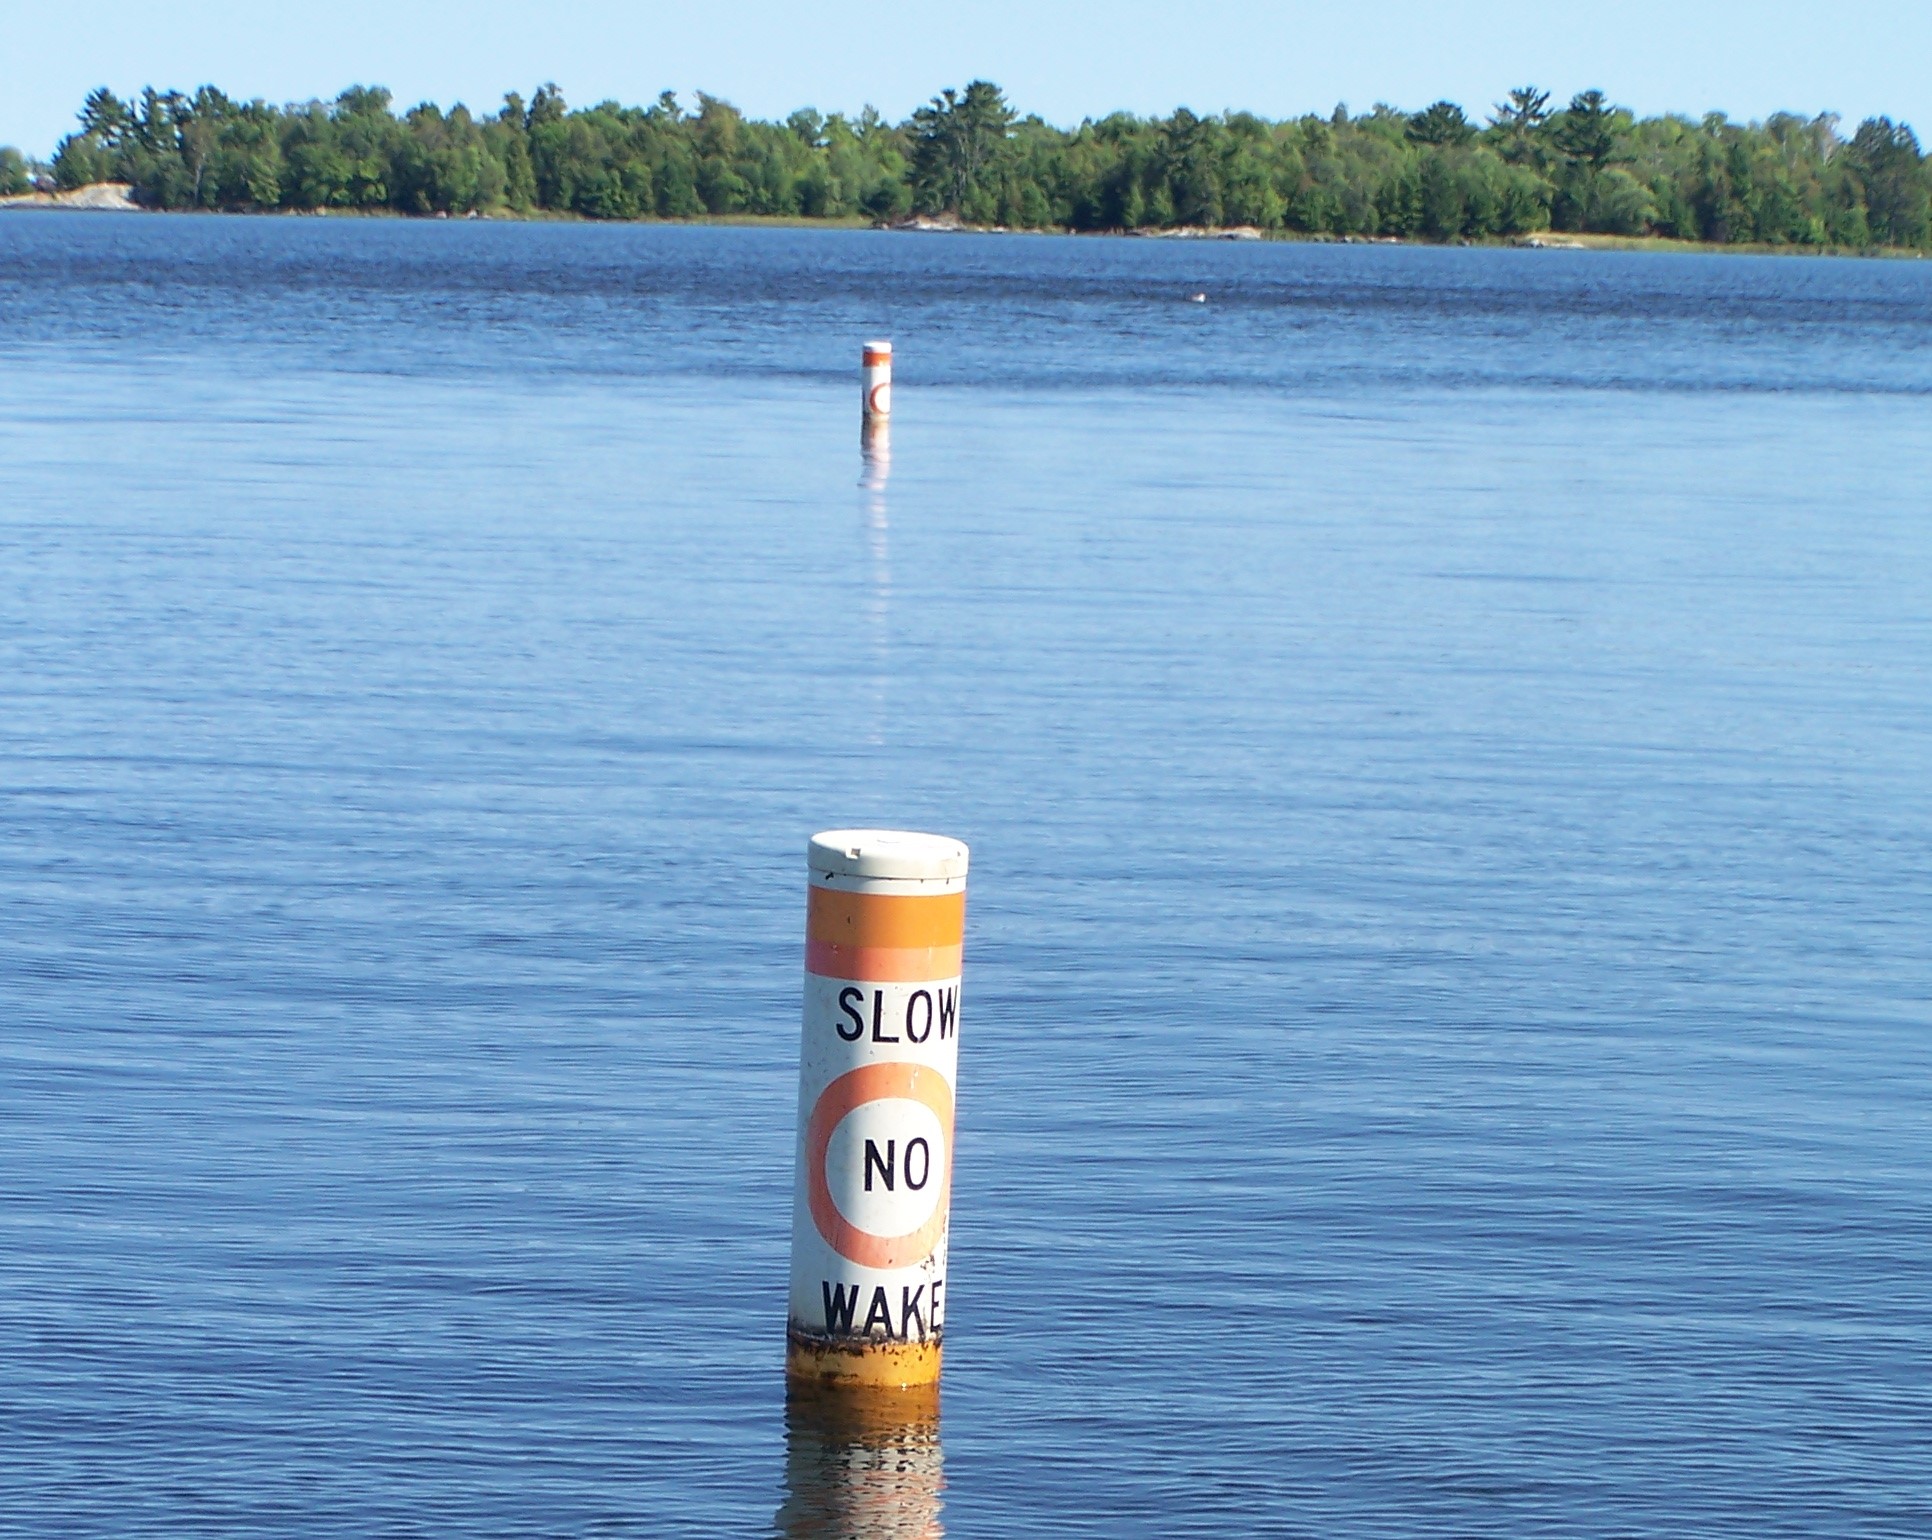 Orange and white No Wake buoys protrude from a lake surface